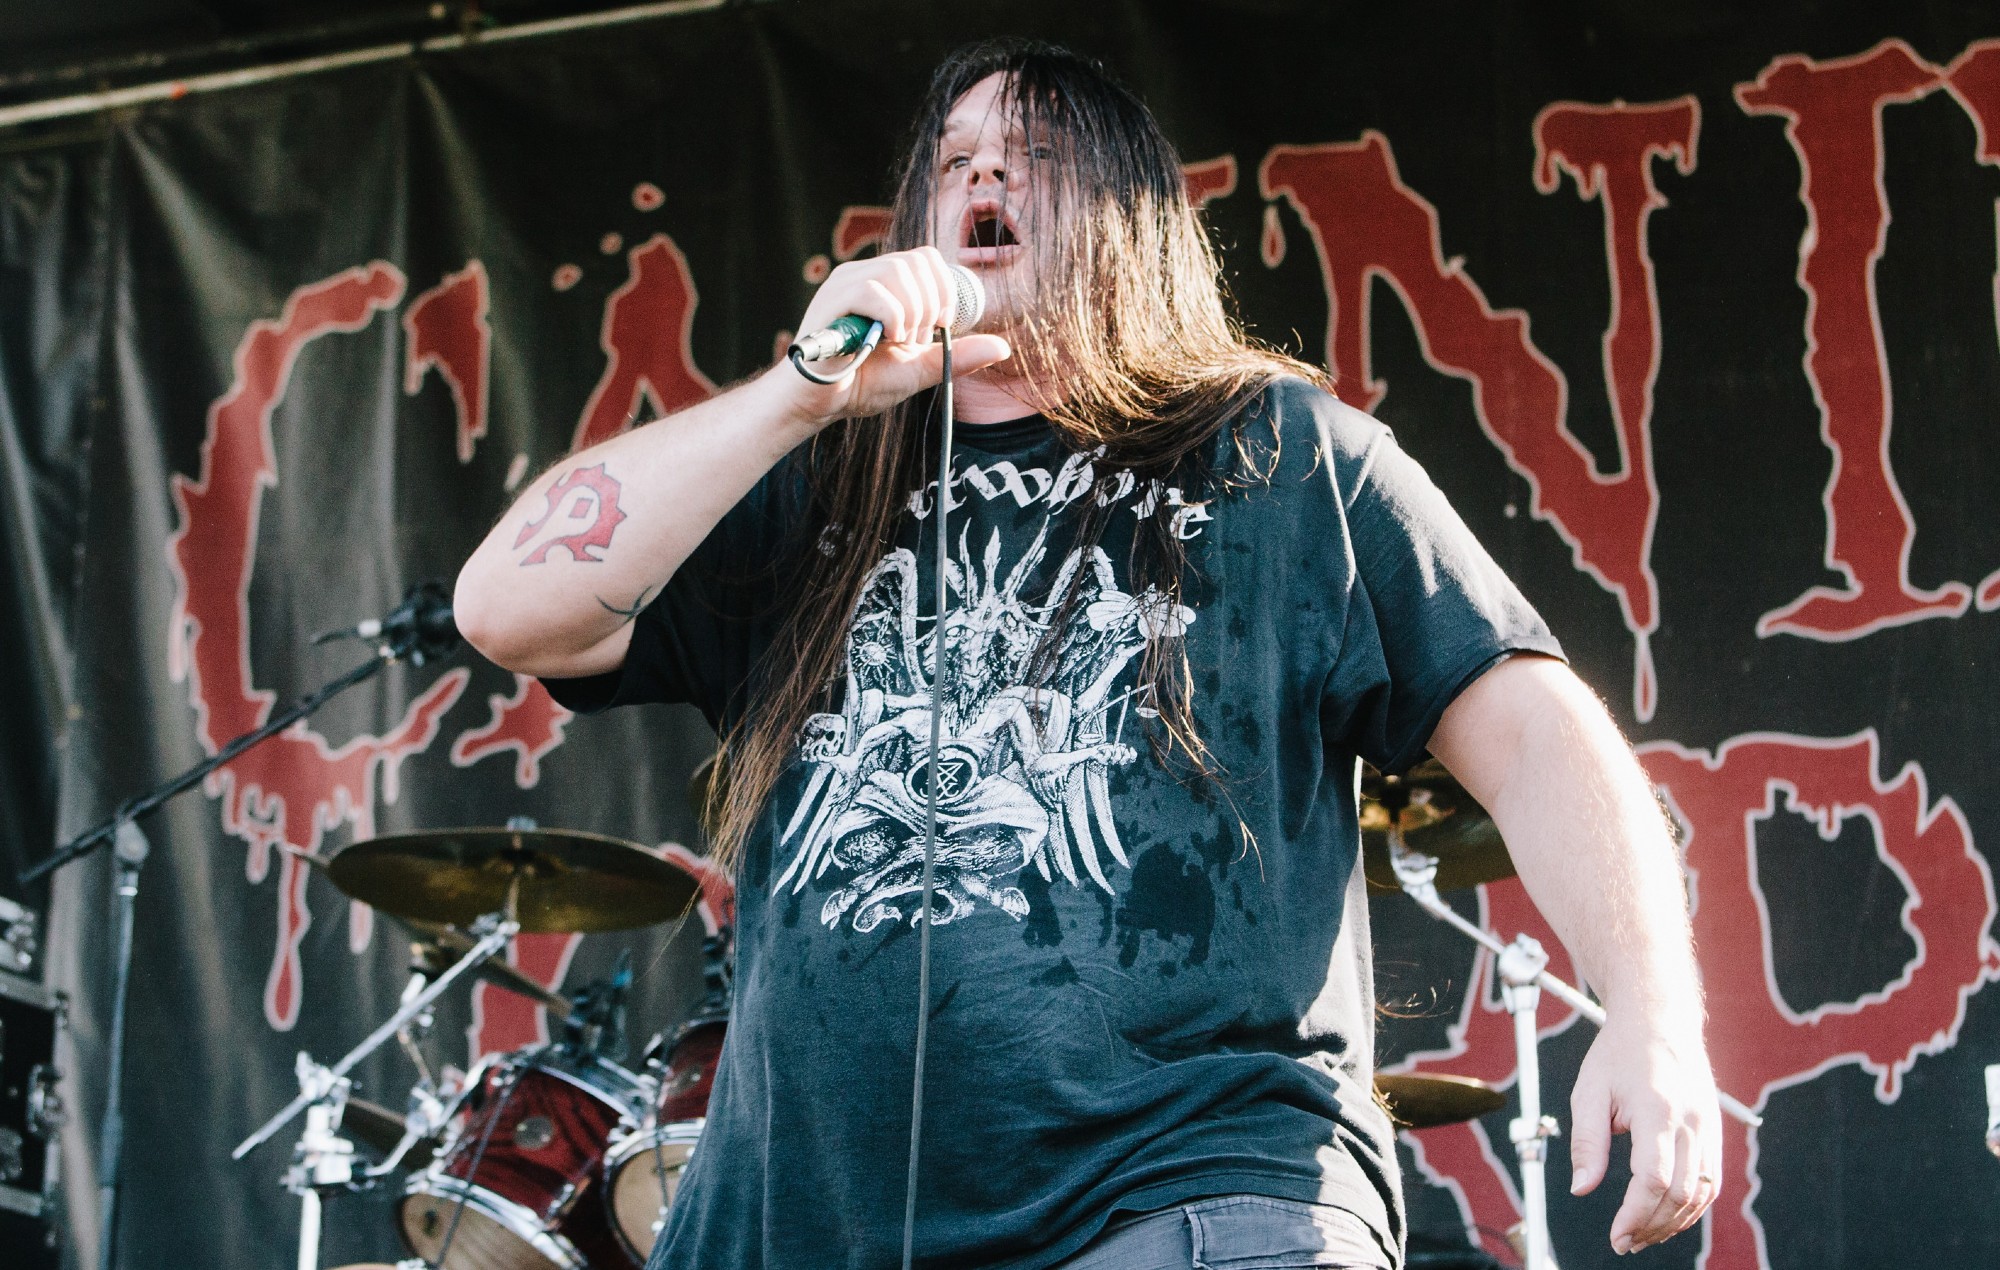 Cannibal Corpse’s new colouring book has been banned in Germany